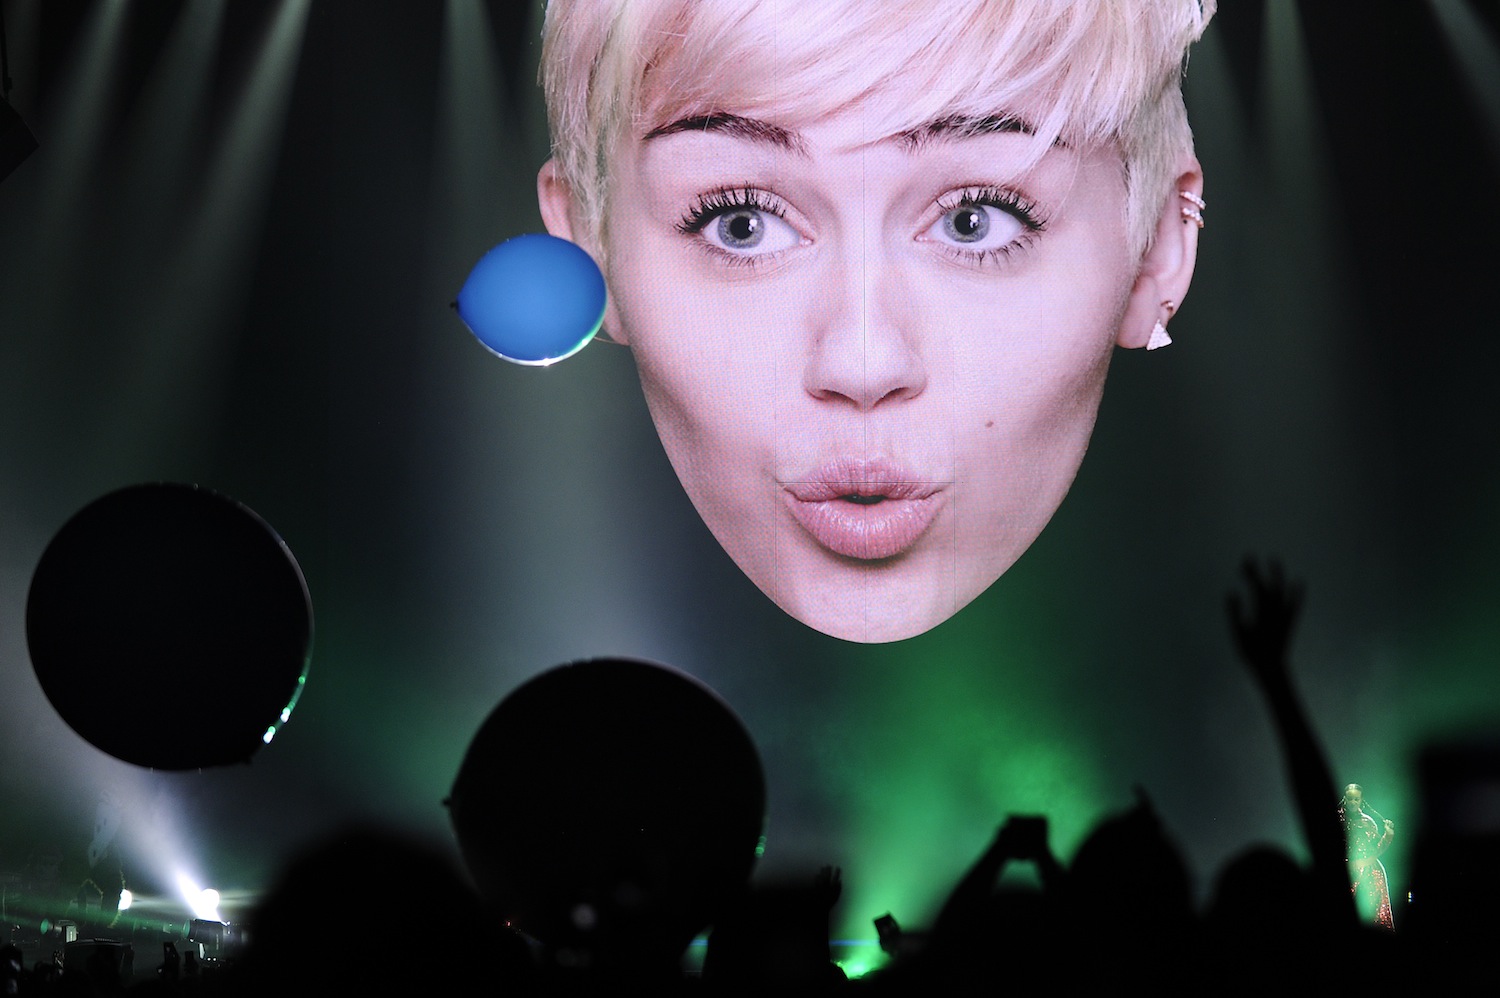 Miley Cyrus performs in Denver during a stop on her Bangerz Tour on Mar. 4, 2014